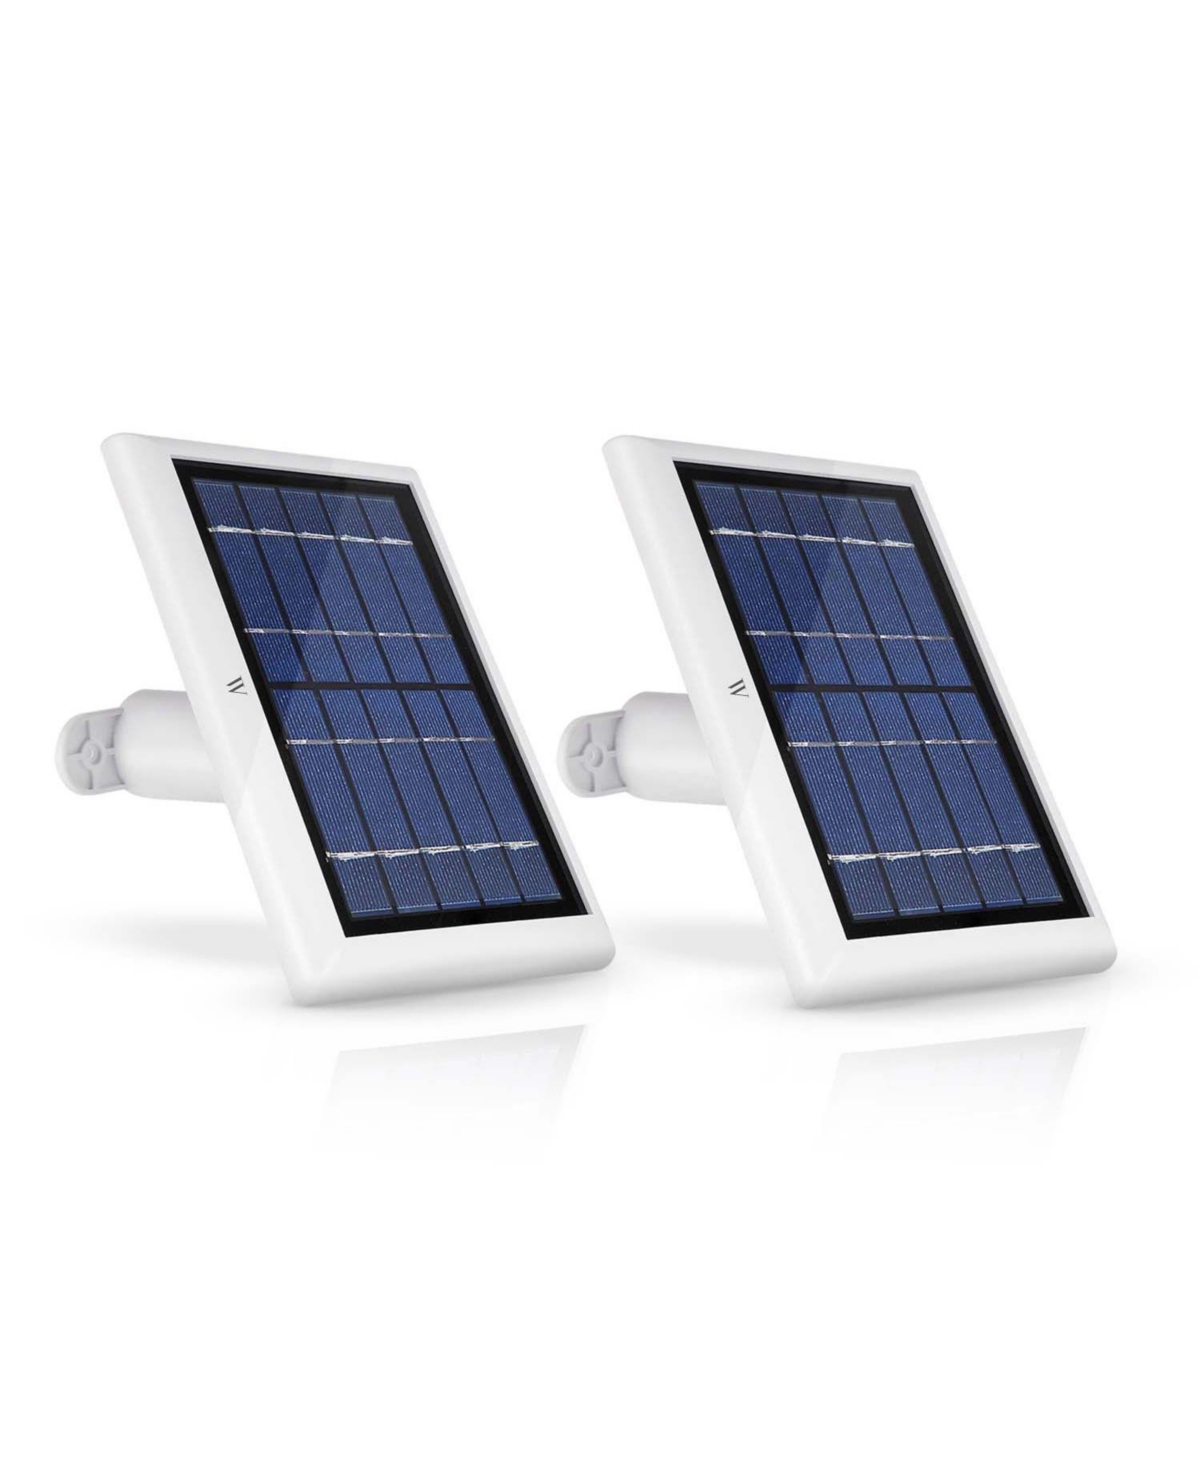 Wasserstein Solar Panel For Wyze Cam Outdoor - Power Your Surveillance Camera Continuously With 2w 5v Charging ( In White